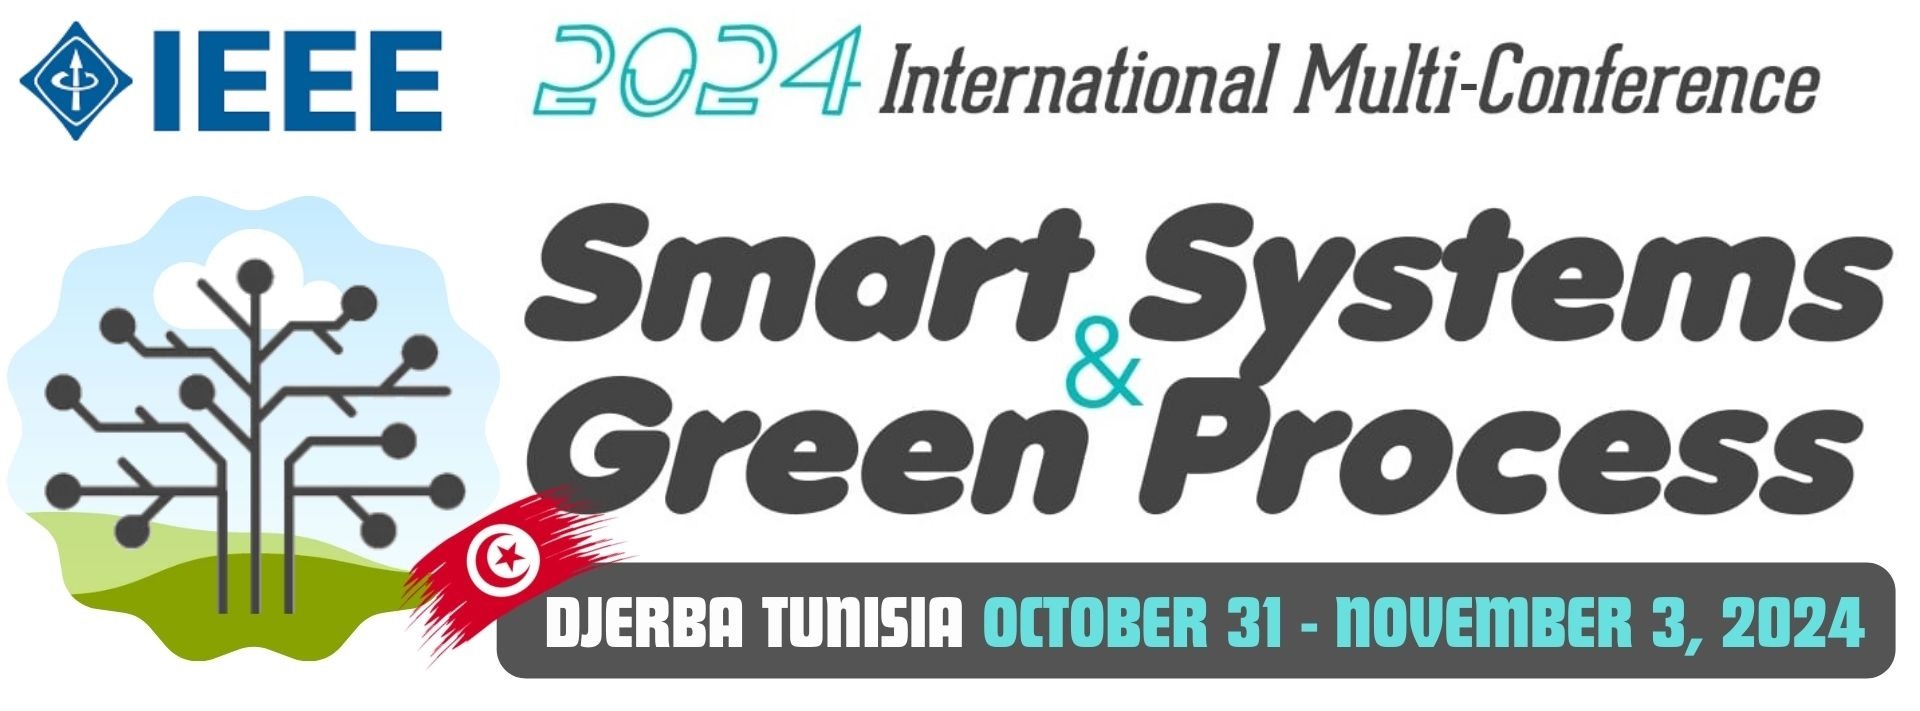 IEEE International Multi-Conference on Smart Systems & Green Process